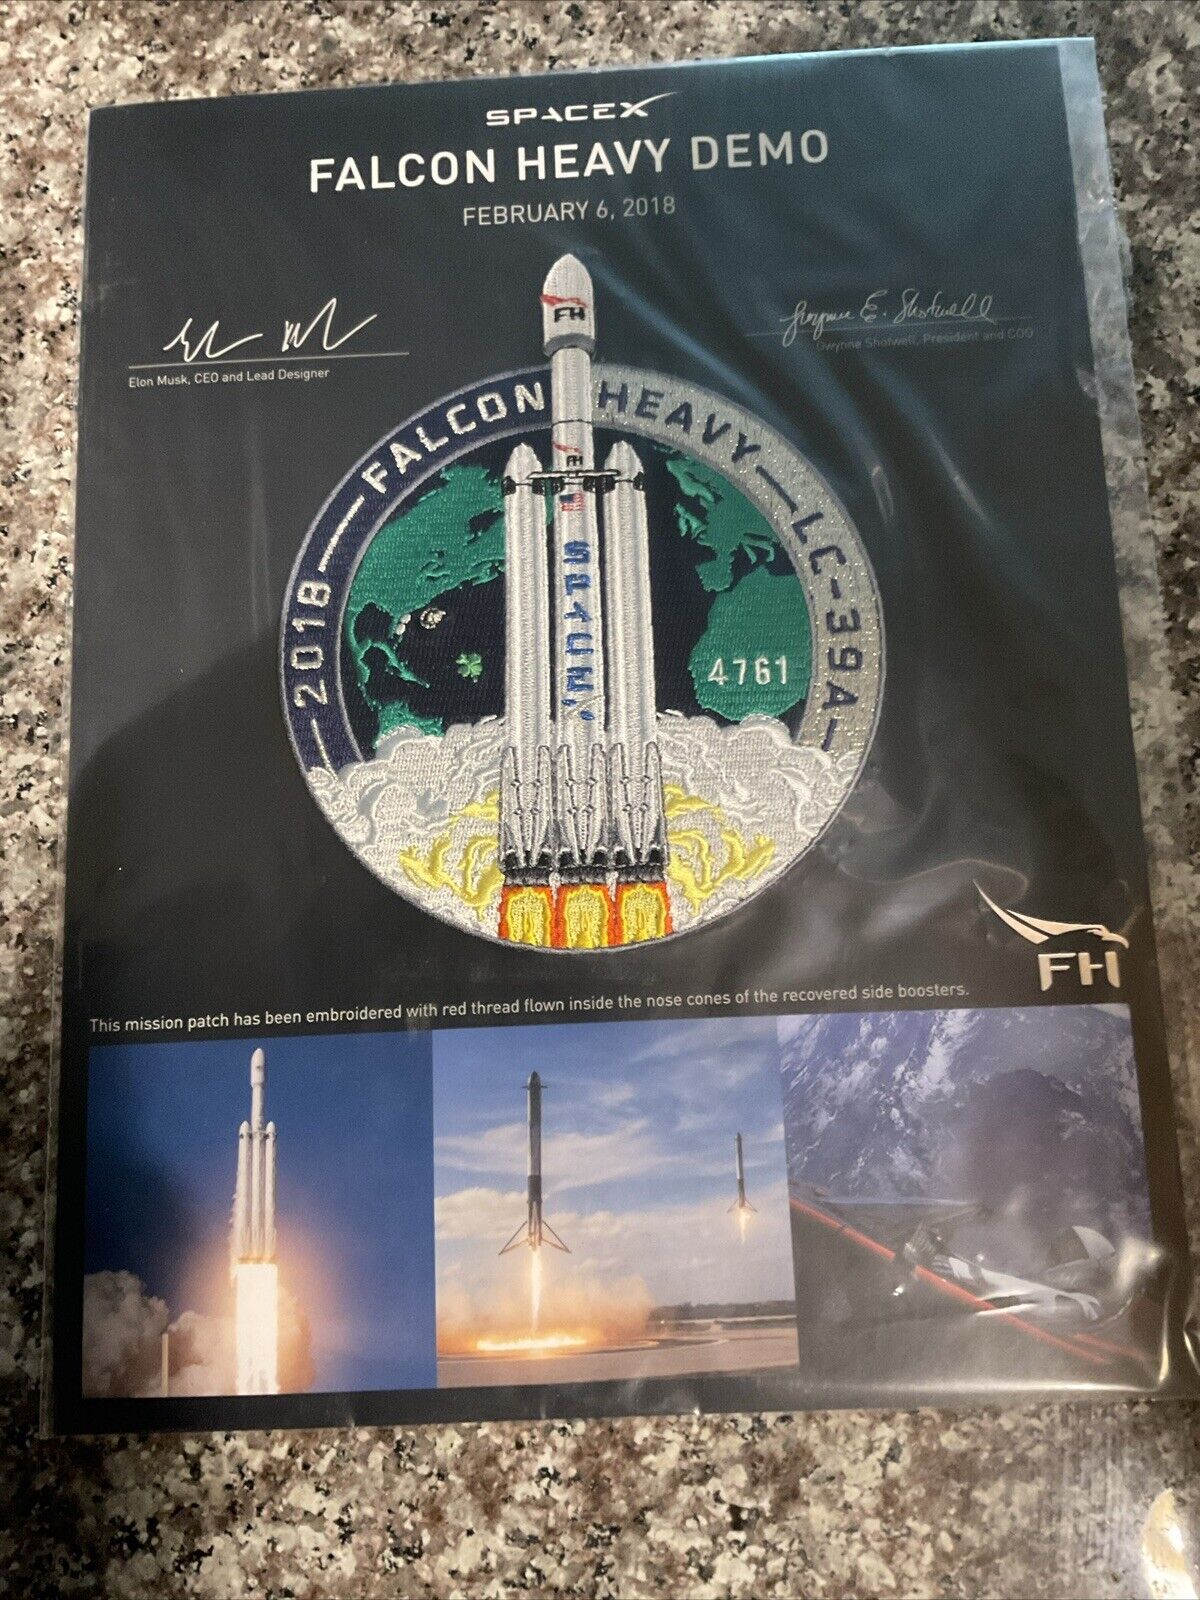 SpaceX Flown Thread Falcon Heavy Demo Patch W/ Facsimile Signature & Numbered.